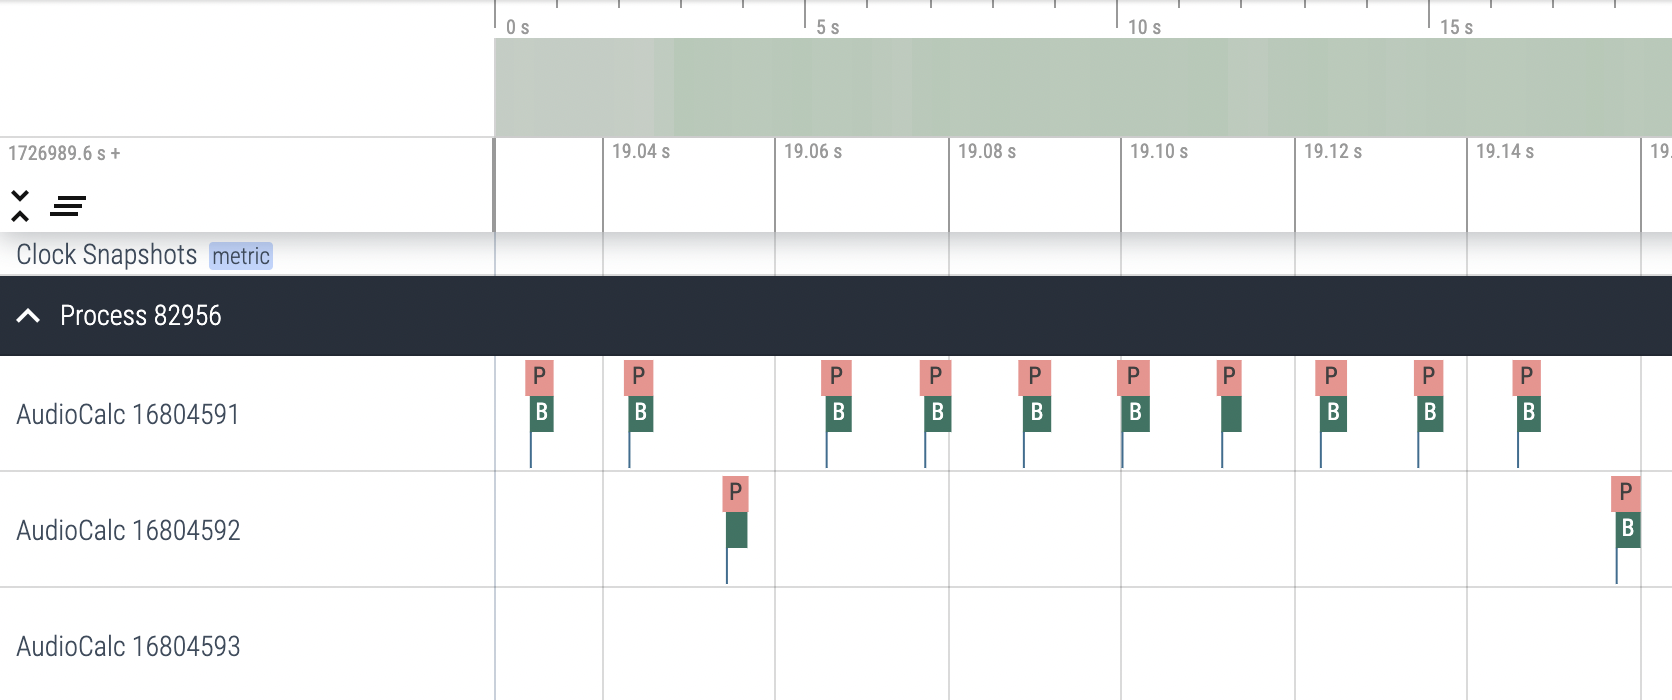 Melatonin Perfetto trace showing the audio callback being invoked at regular intervals